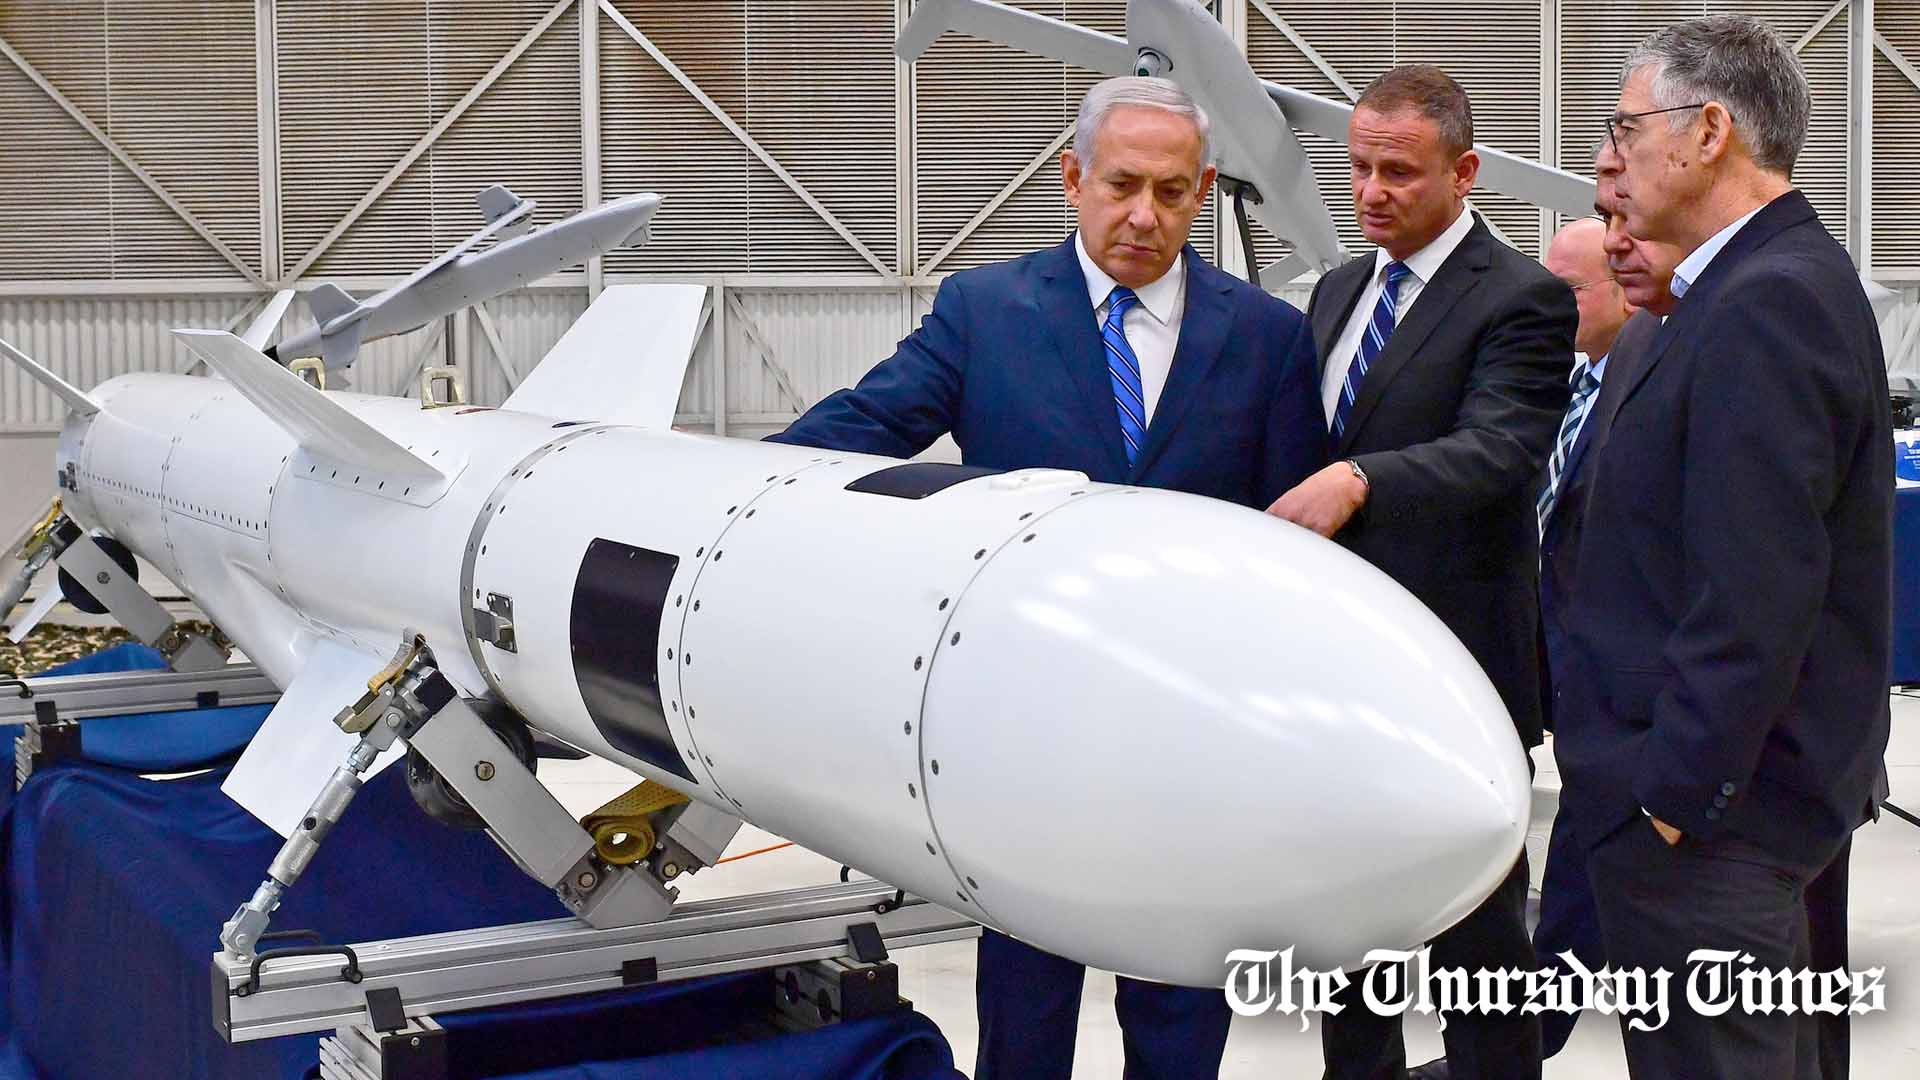 A file photo is shown of Israeli prime minister Benjamin Netanyahu examining a rocket with colleagues. — FILE/THE THURSDAY TIMES